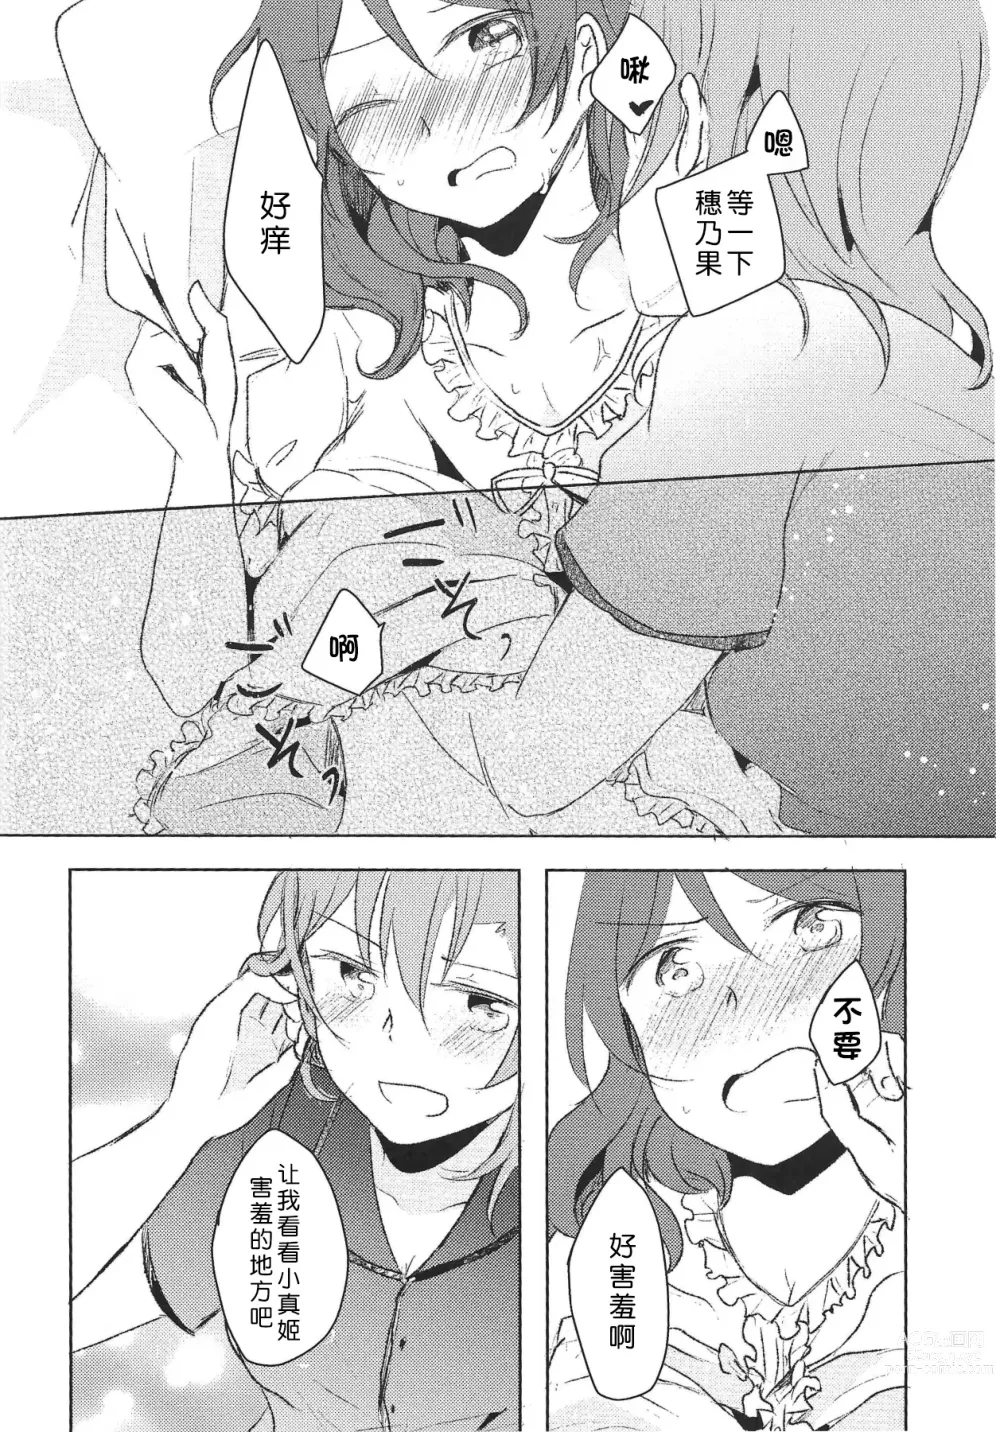 Page 16 of doujinshi LOVE STEP!